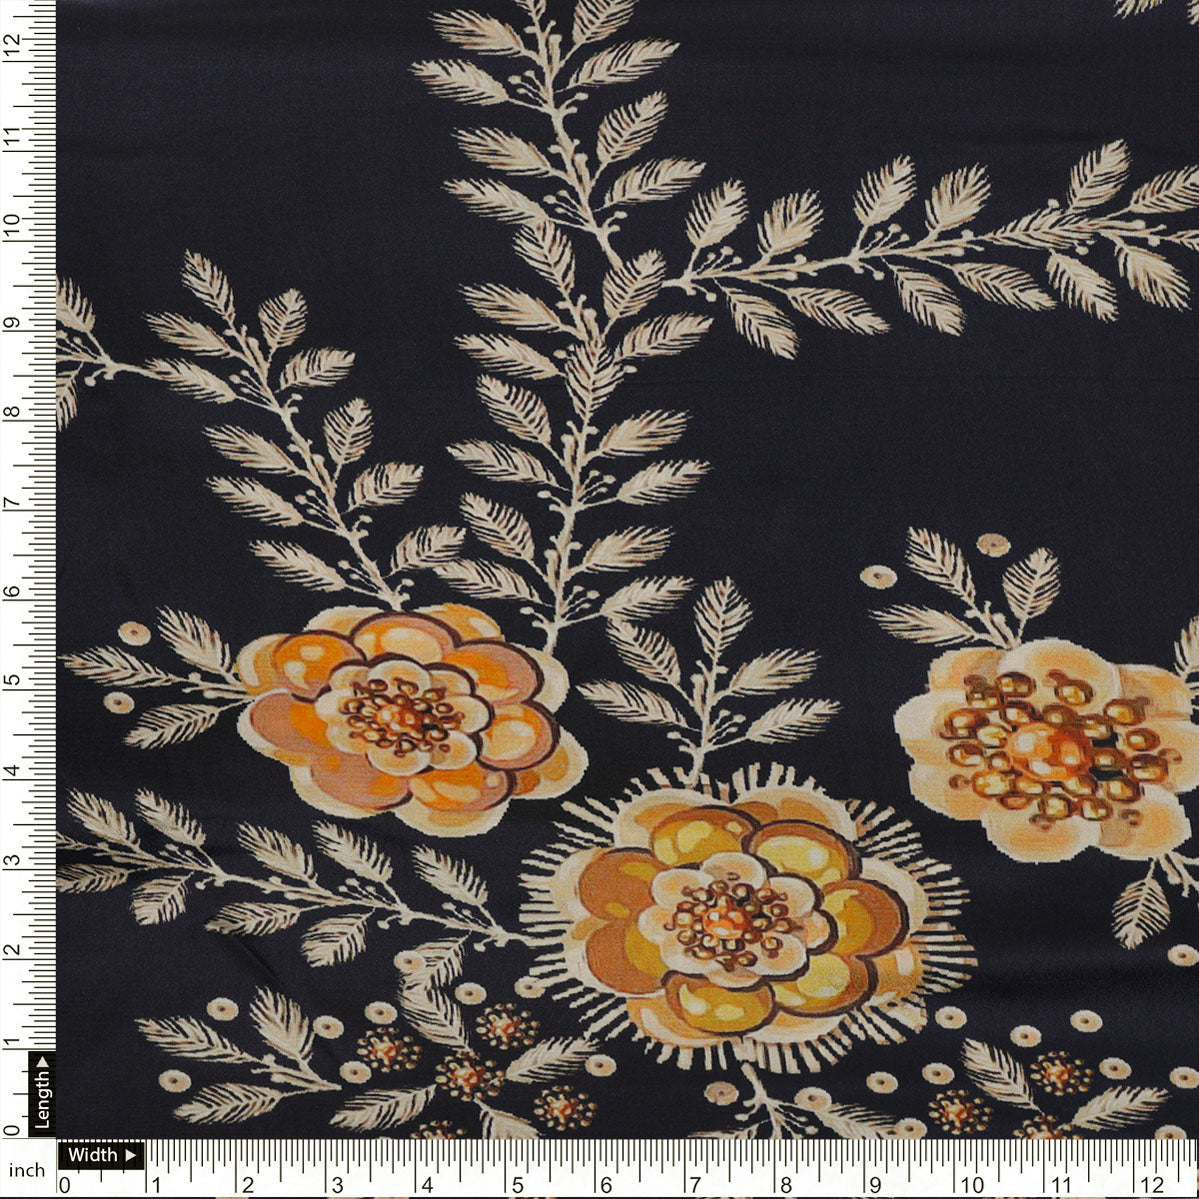 Embroidery Flower And Buds Digital Printed Fabric - Natural Crepe